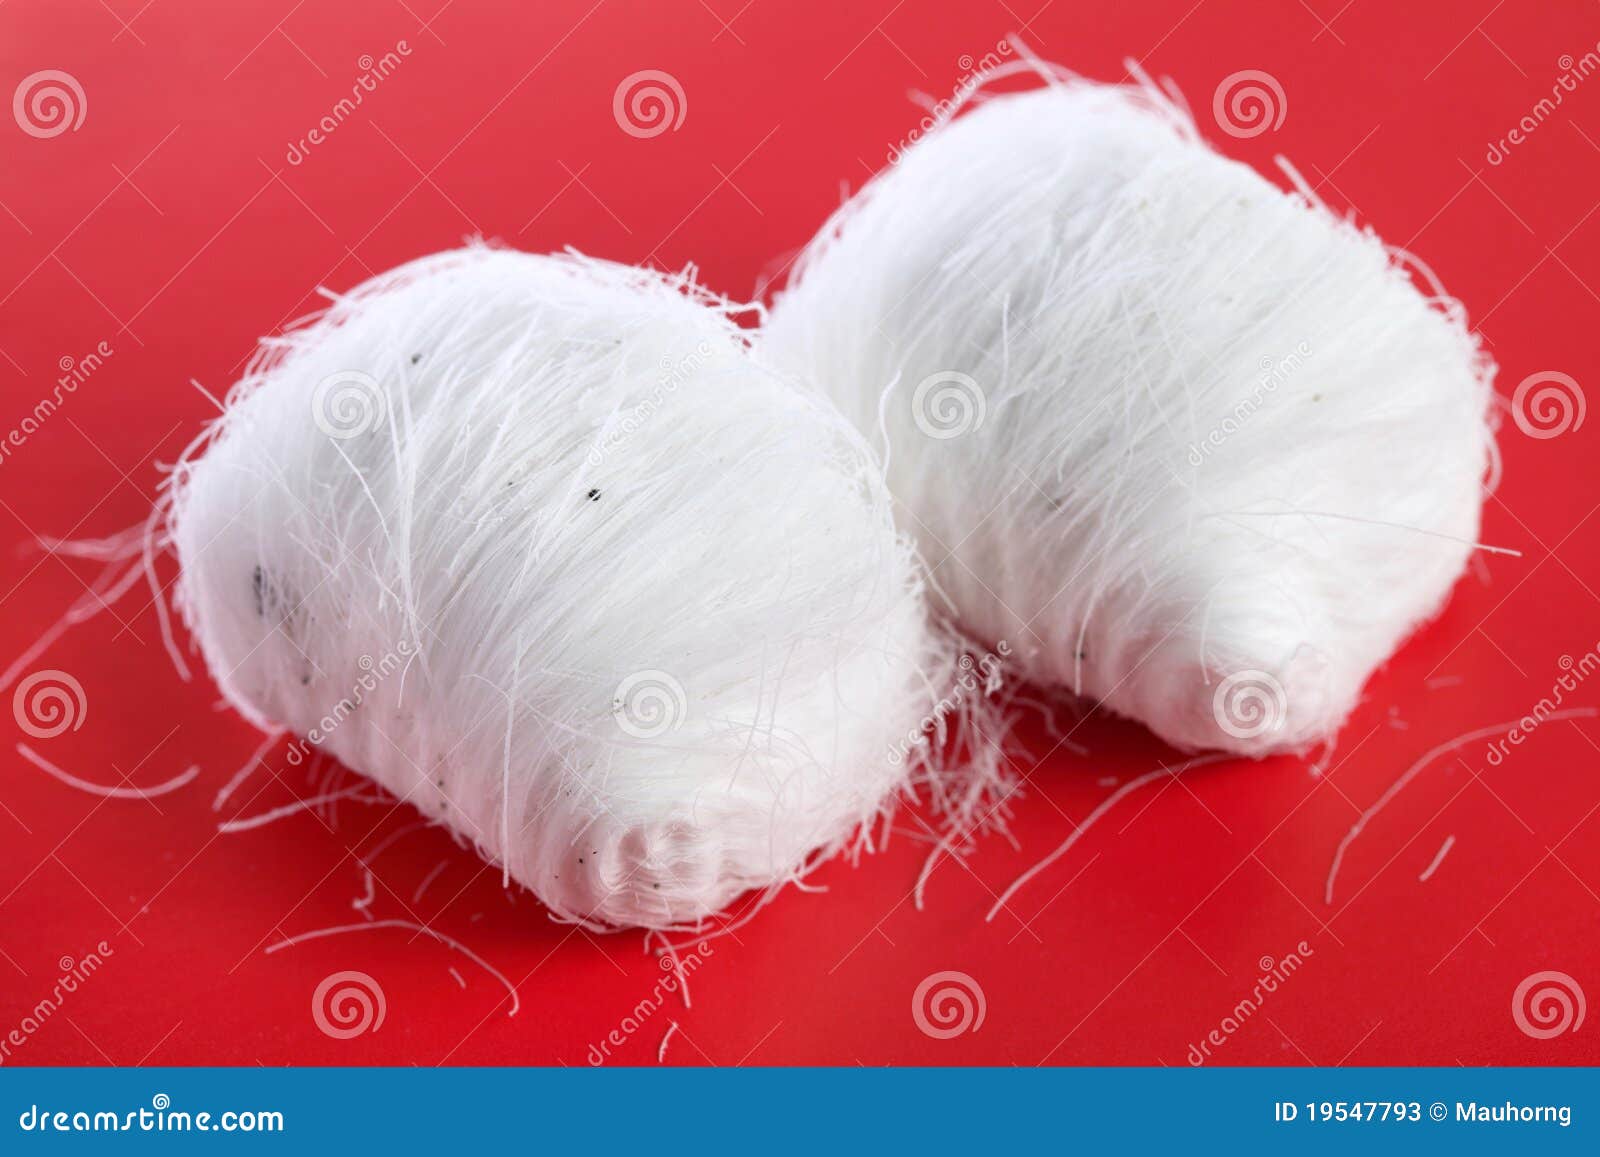 968 Beard Candy Photos Free Royalty Free Stock Photos From Dreamstime